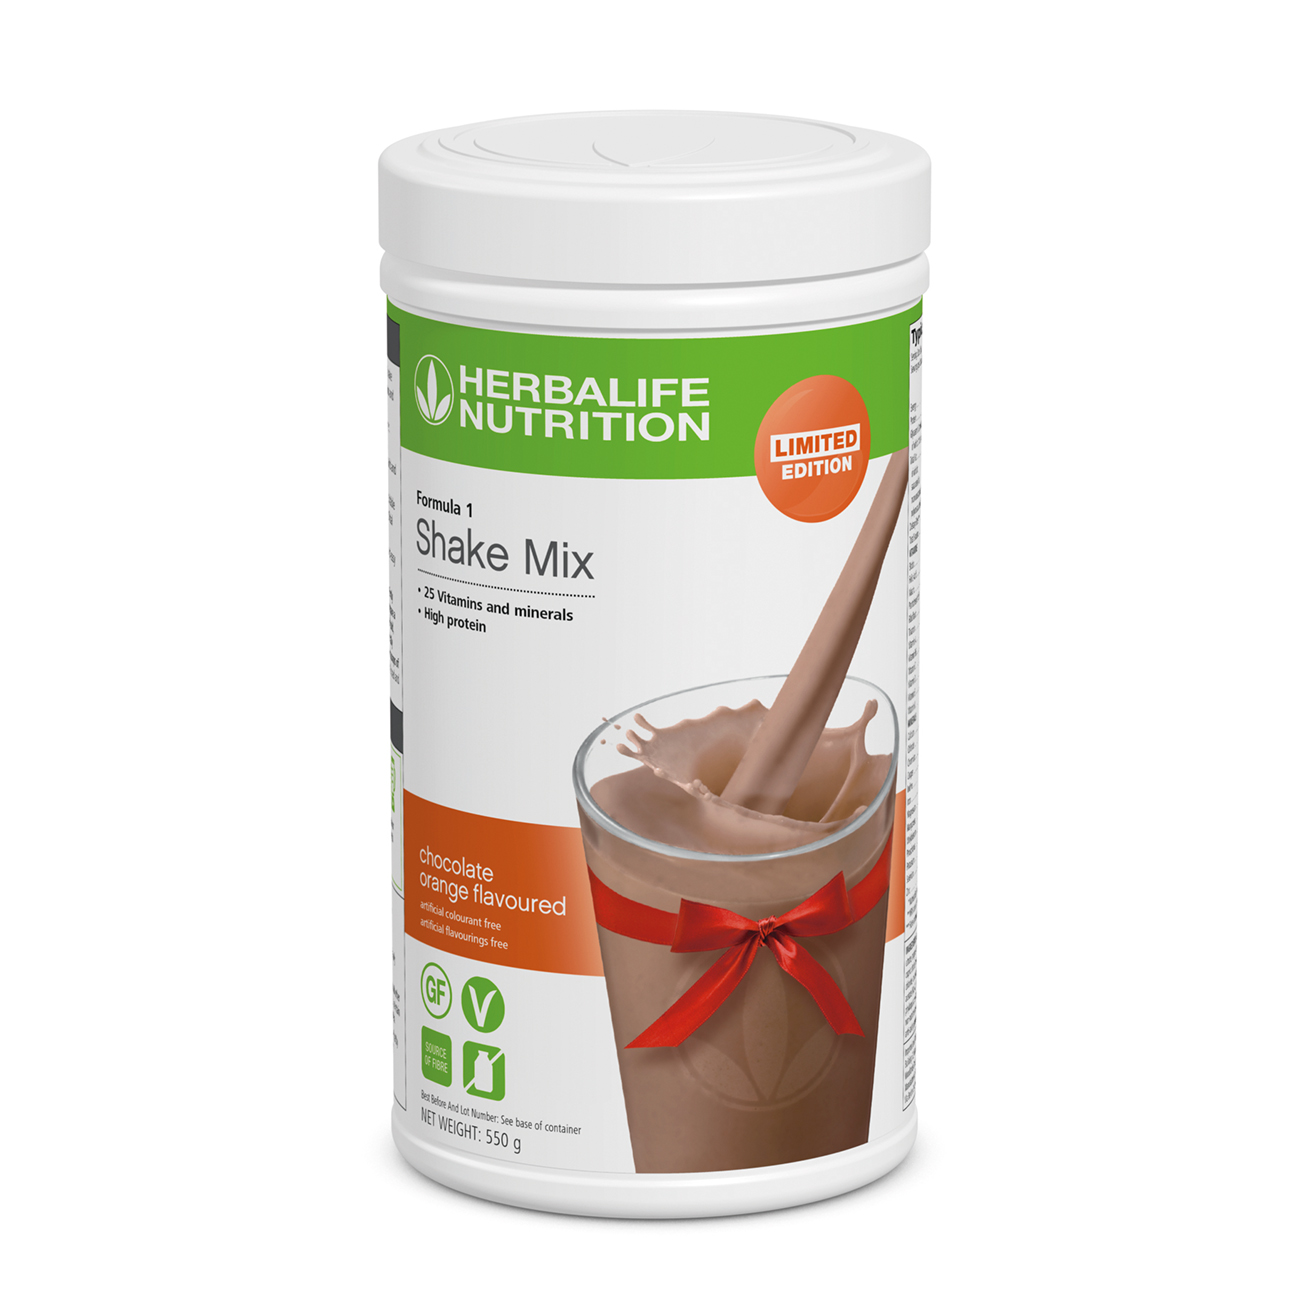 NEW Formula 1 Chocolate Orange Flavoured limited edition is a joyful addition to the Formula 1 family. Grab it before it’s gone! F1 Chocolate Orange Flavoured Limited Edition is a delicious and convenient shake mix, high in protein, made of ingredients that are suitable for vegans and is gluten free. 